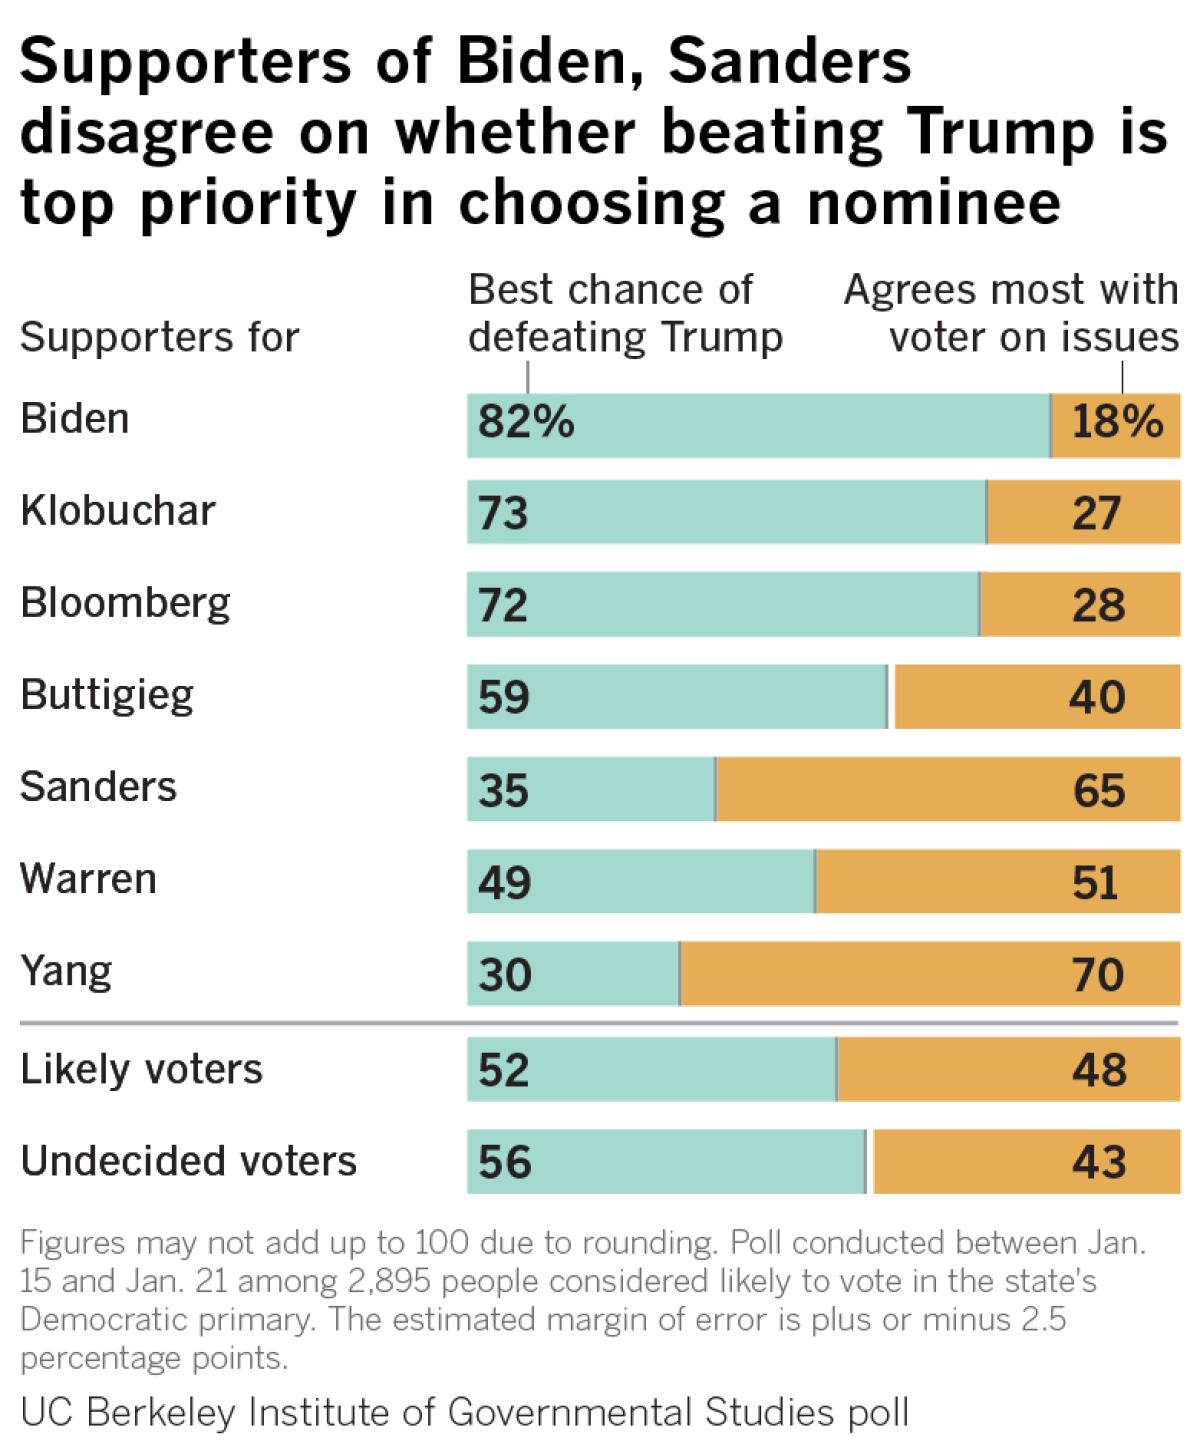 Supporters of Biden, Sanders differ on whether beating Trump is top priority in 2020 election